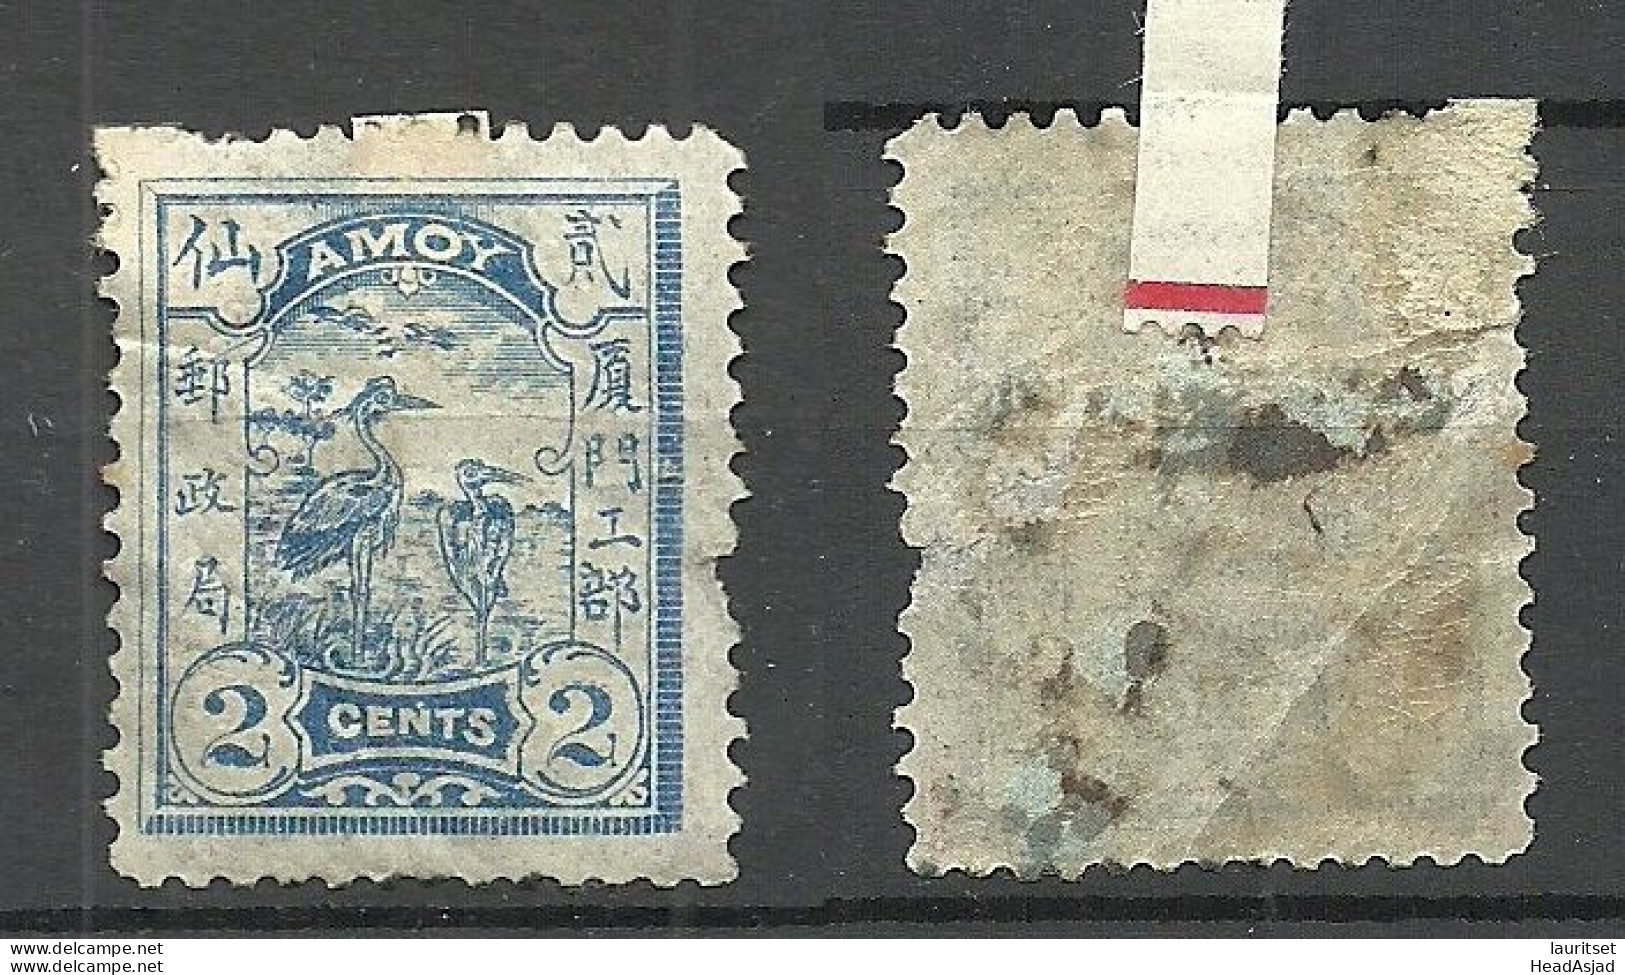 CHINA Chine Imperial China 1895 Local Post Amoy 2 Cent * - Unused Stamps